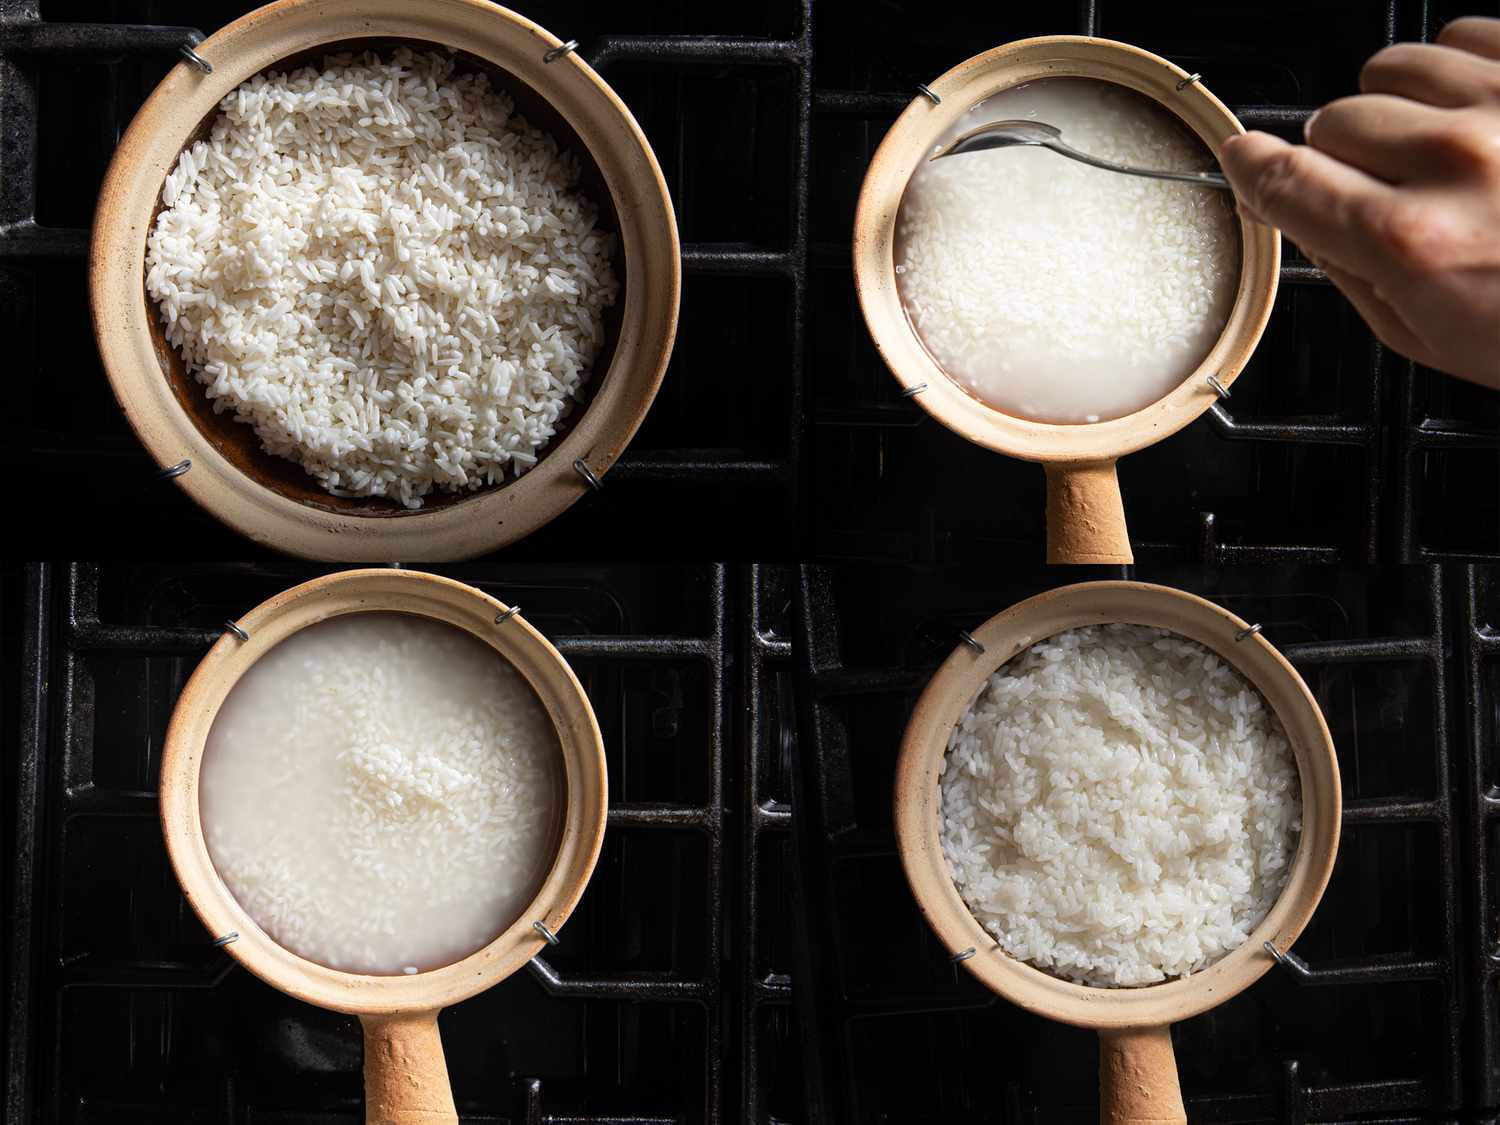 Four different stages of rice being cooked in a Cantonese clay pot.